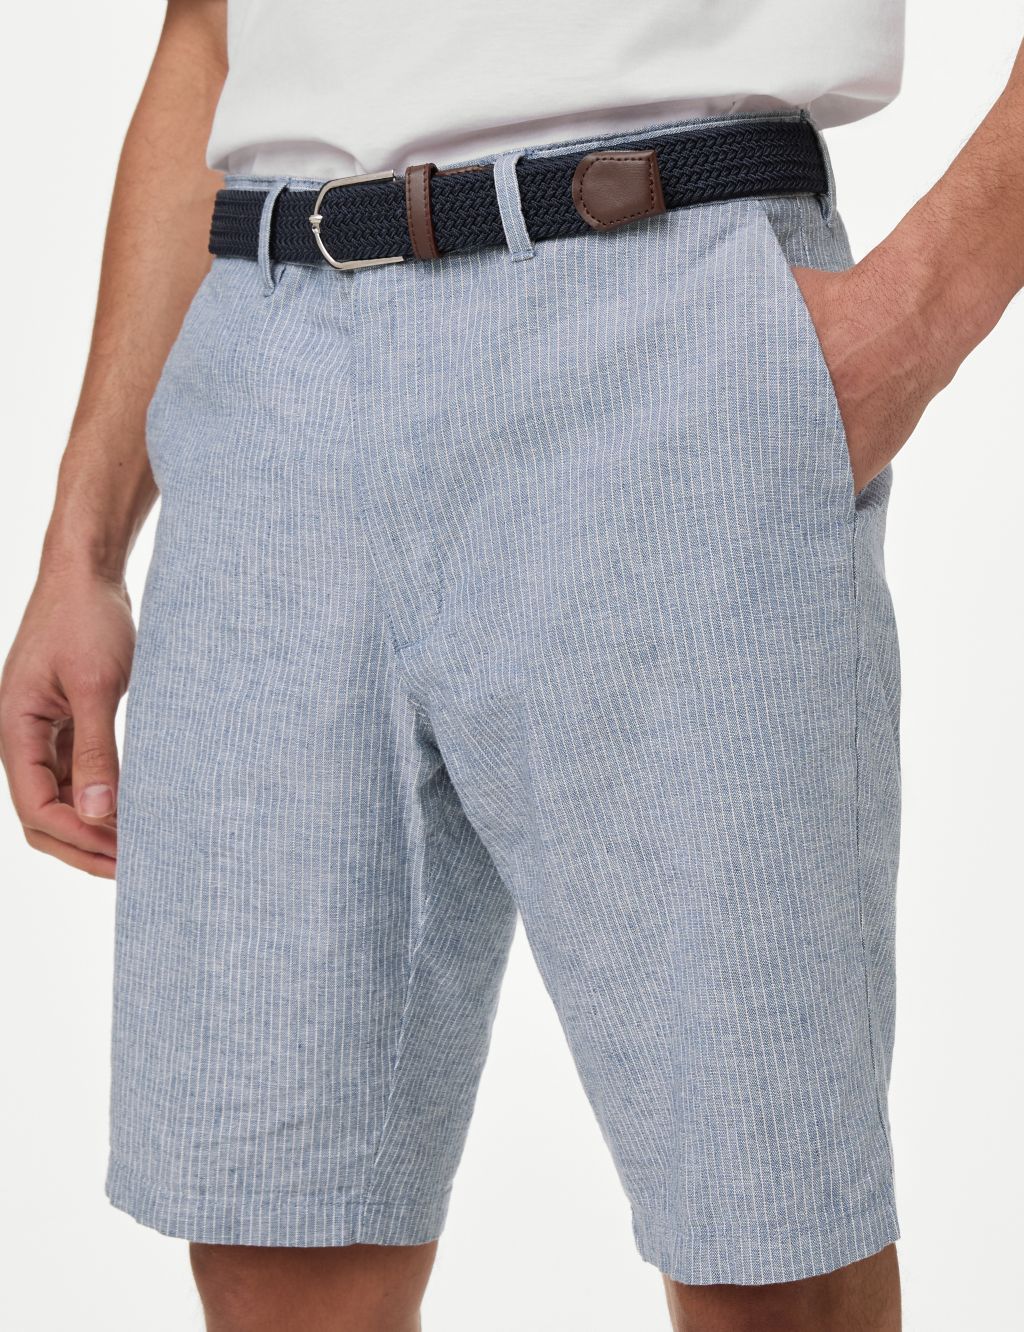 Linen Blend Striped Belted Chino Shorts image 1